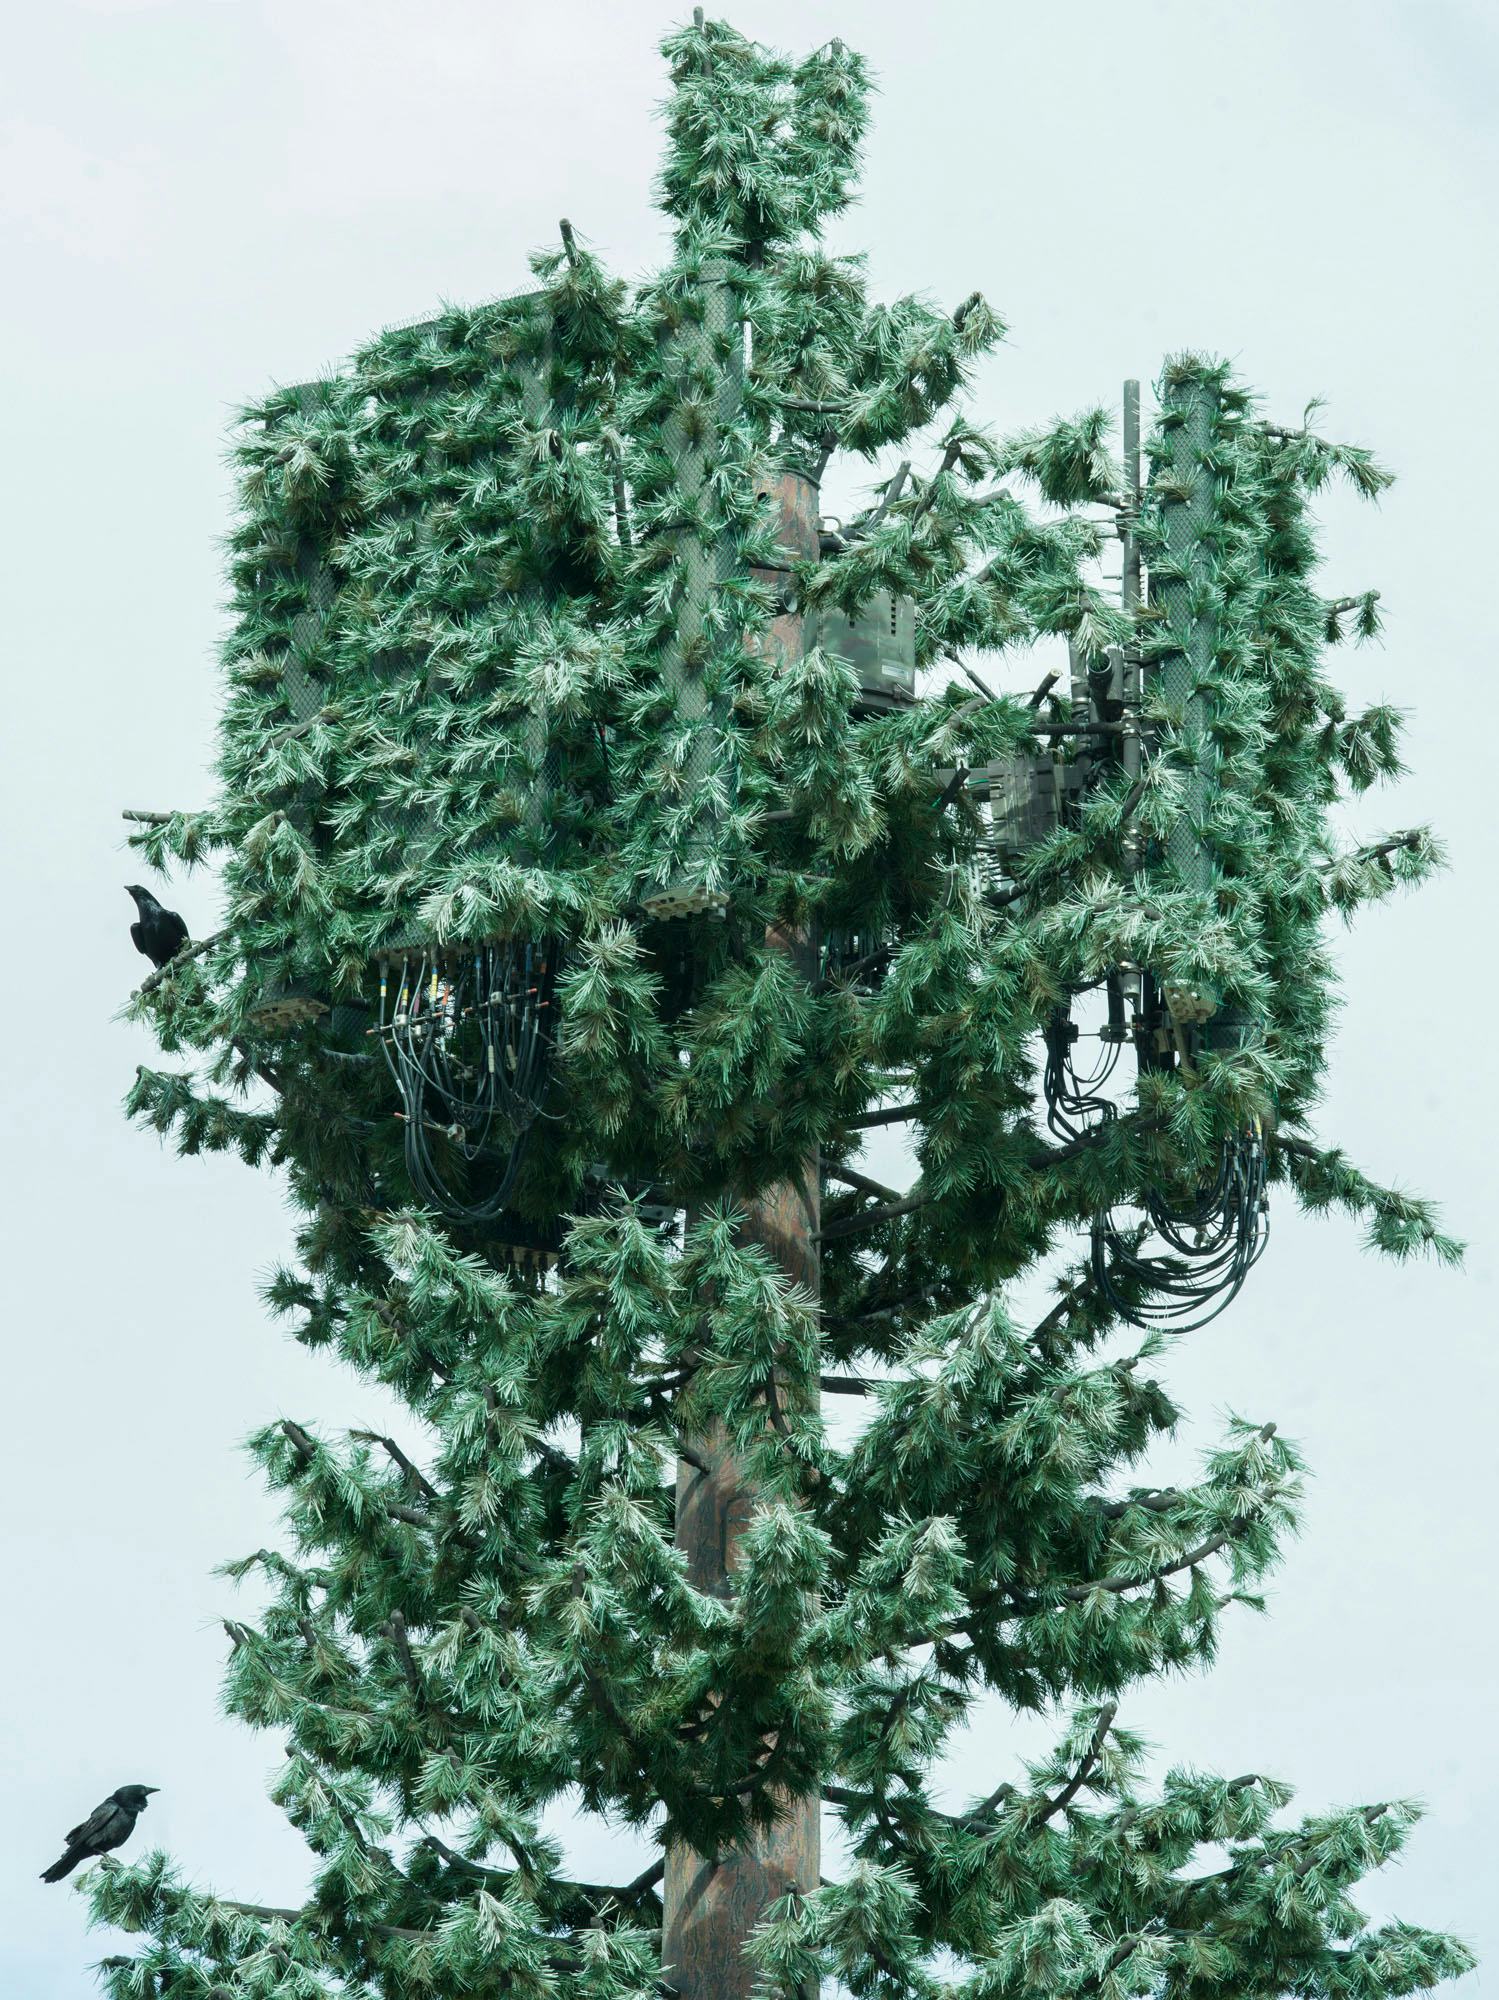 Close-up of a green bushery of a fake tree. In the bottom left corner, a bird can be seen on one of the fake branches © Andrea Orejarena & Caleb Stein